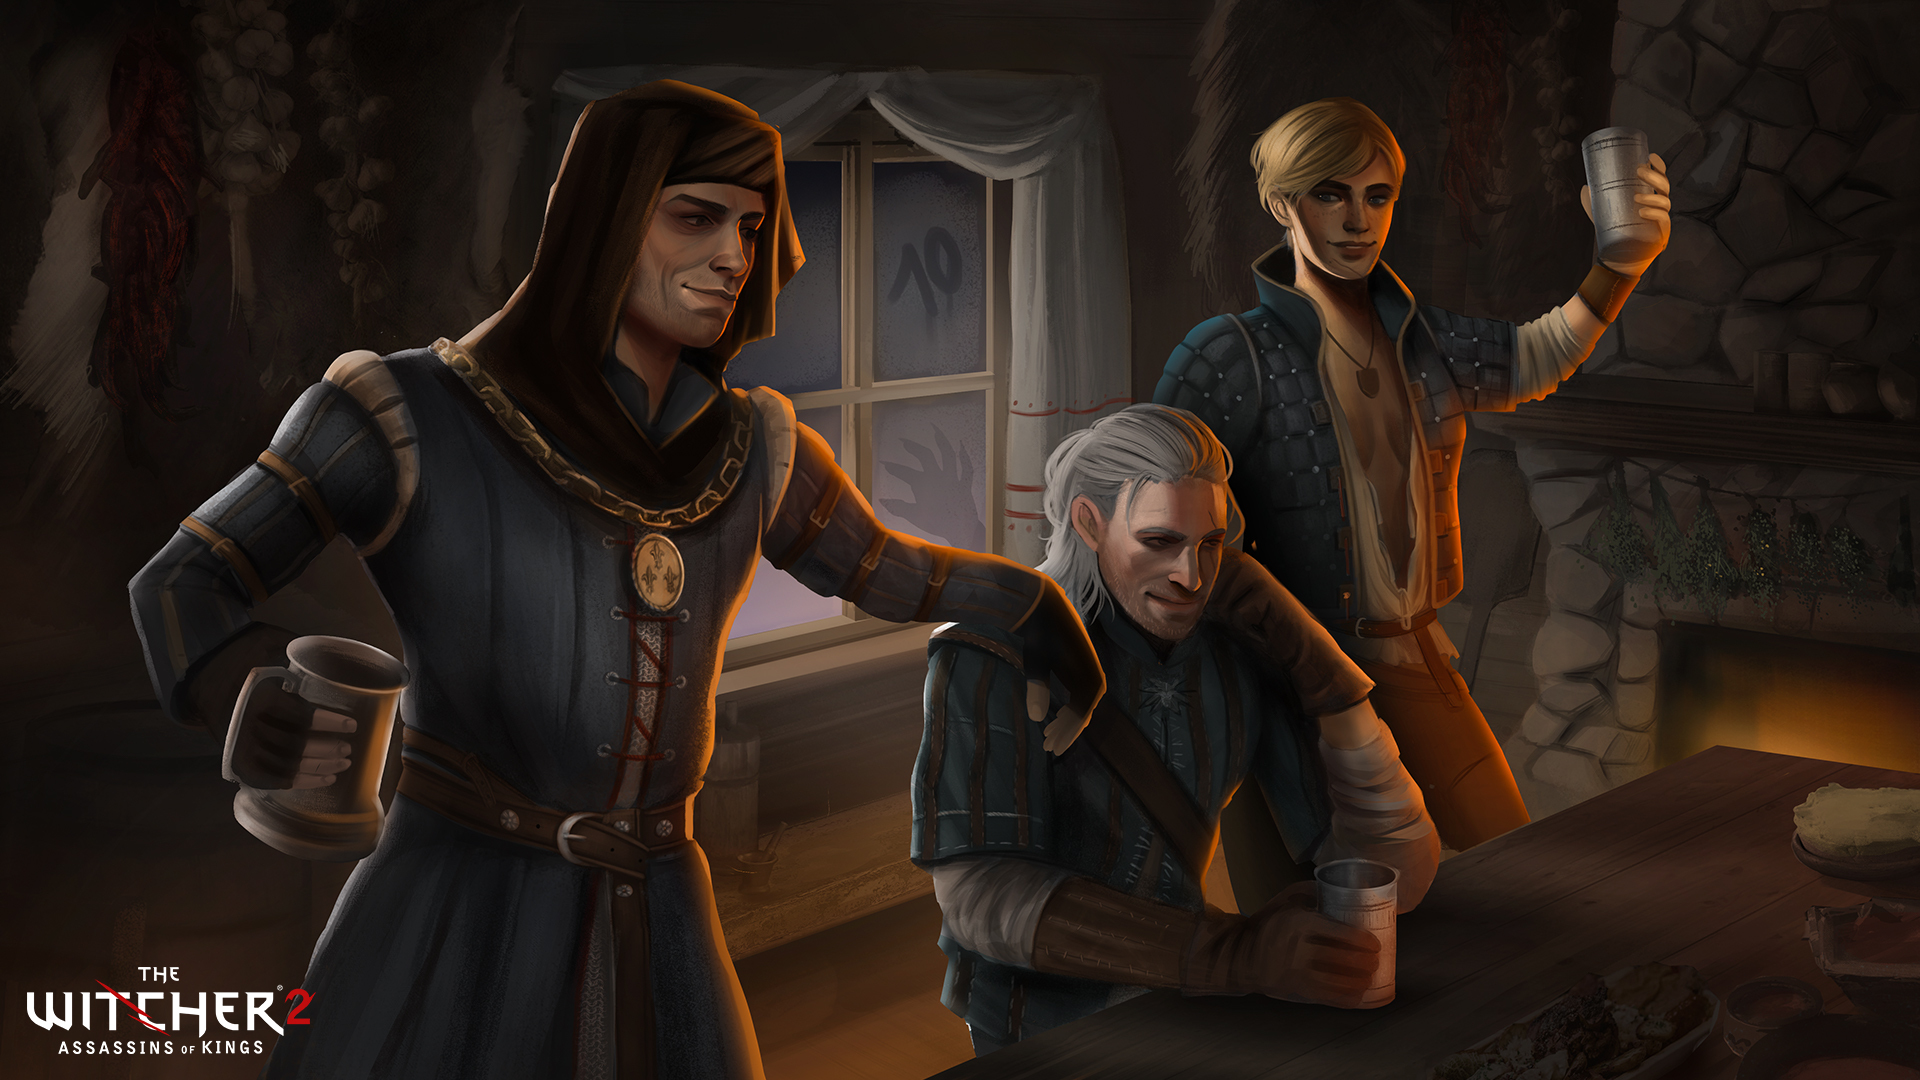 The Witcher The Witcher 2 Assassins Of Kings Geralt Of Rivia 1920x1080